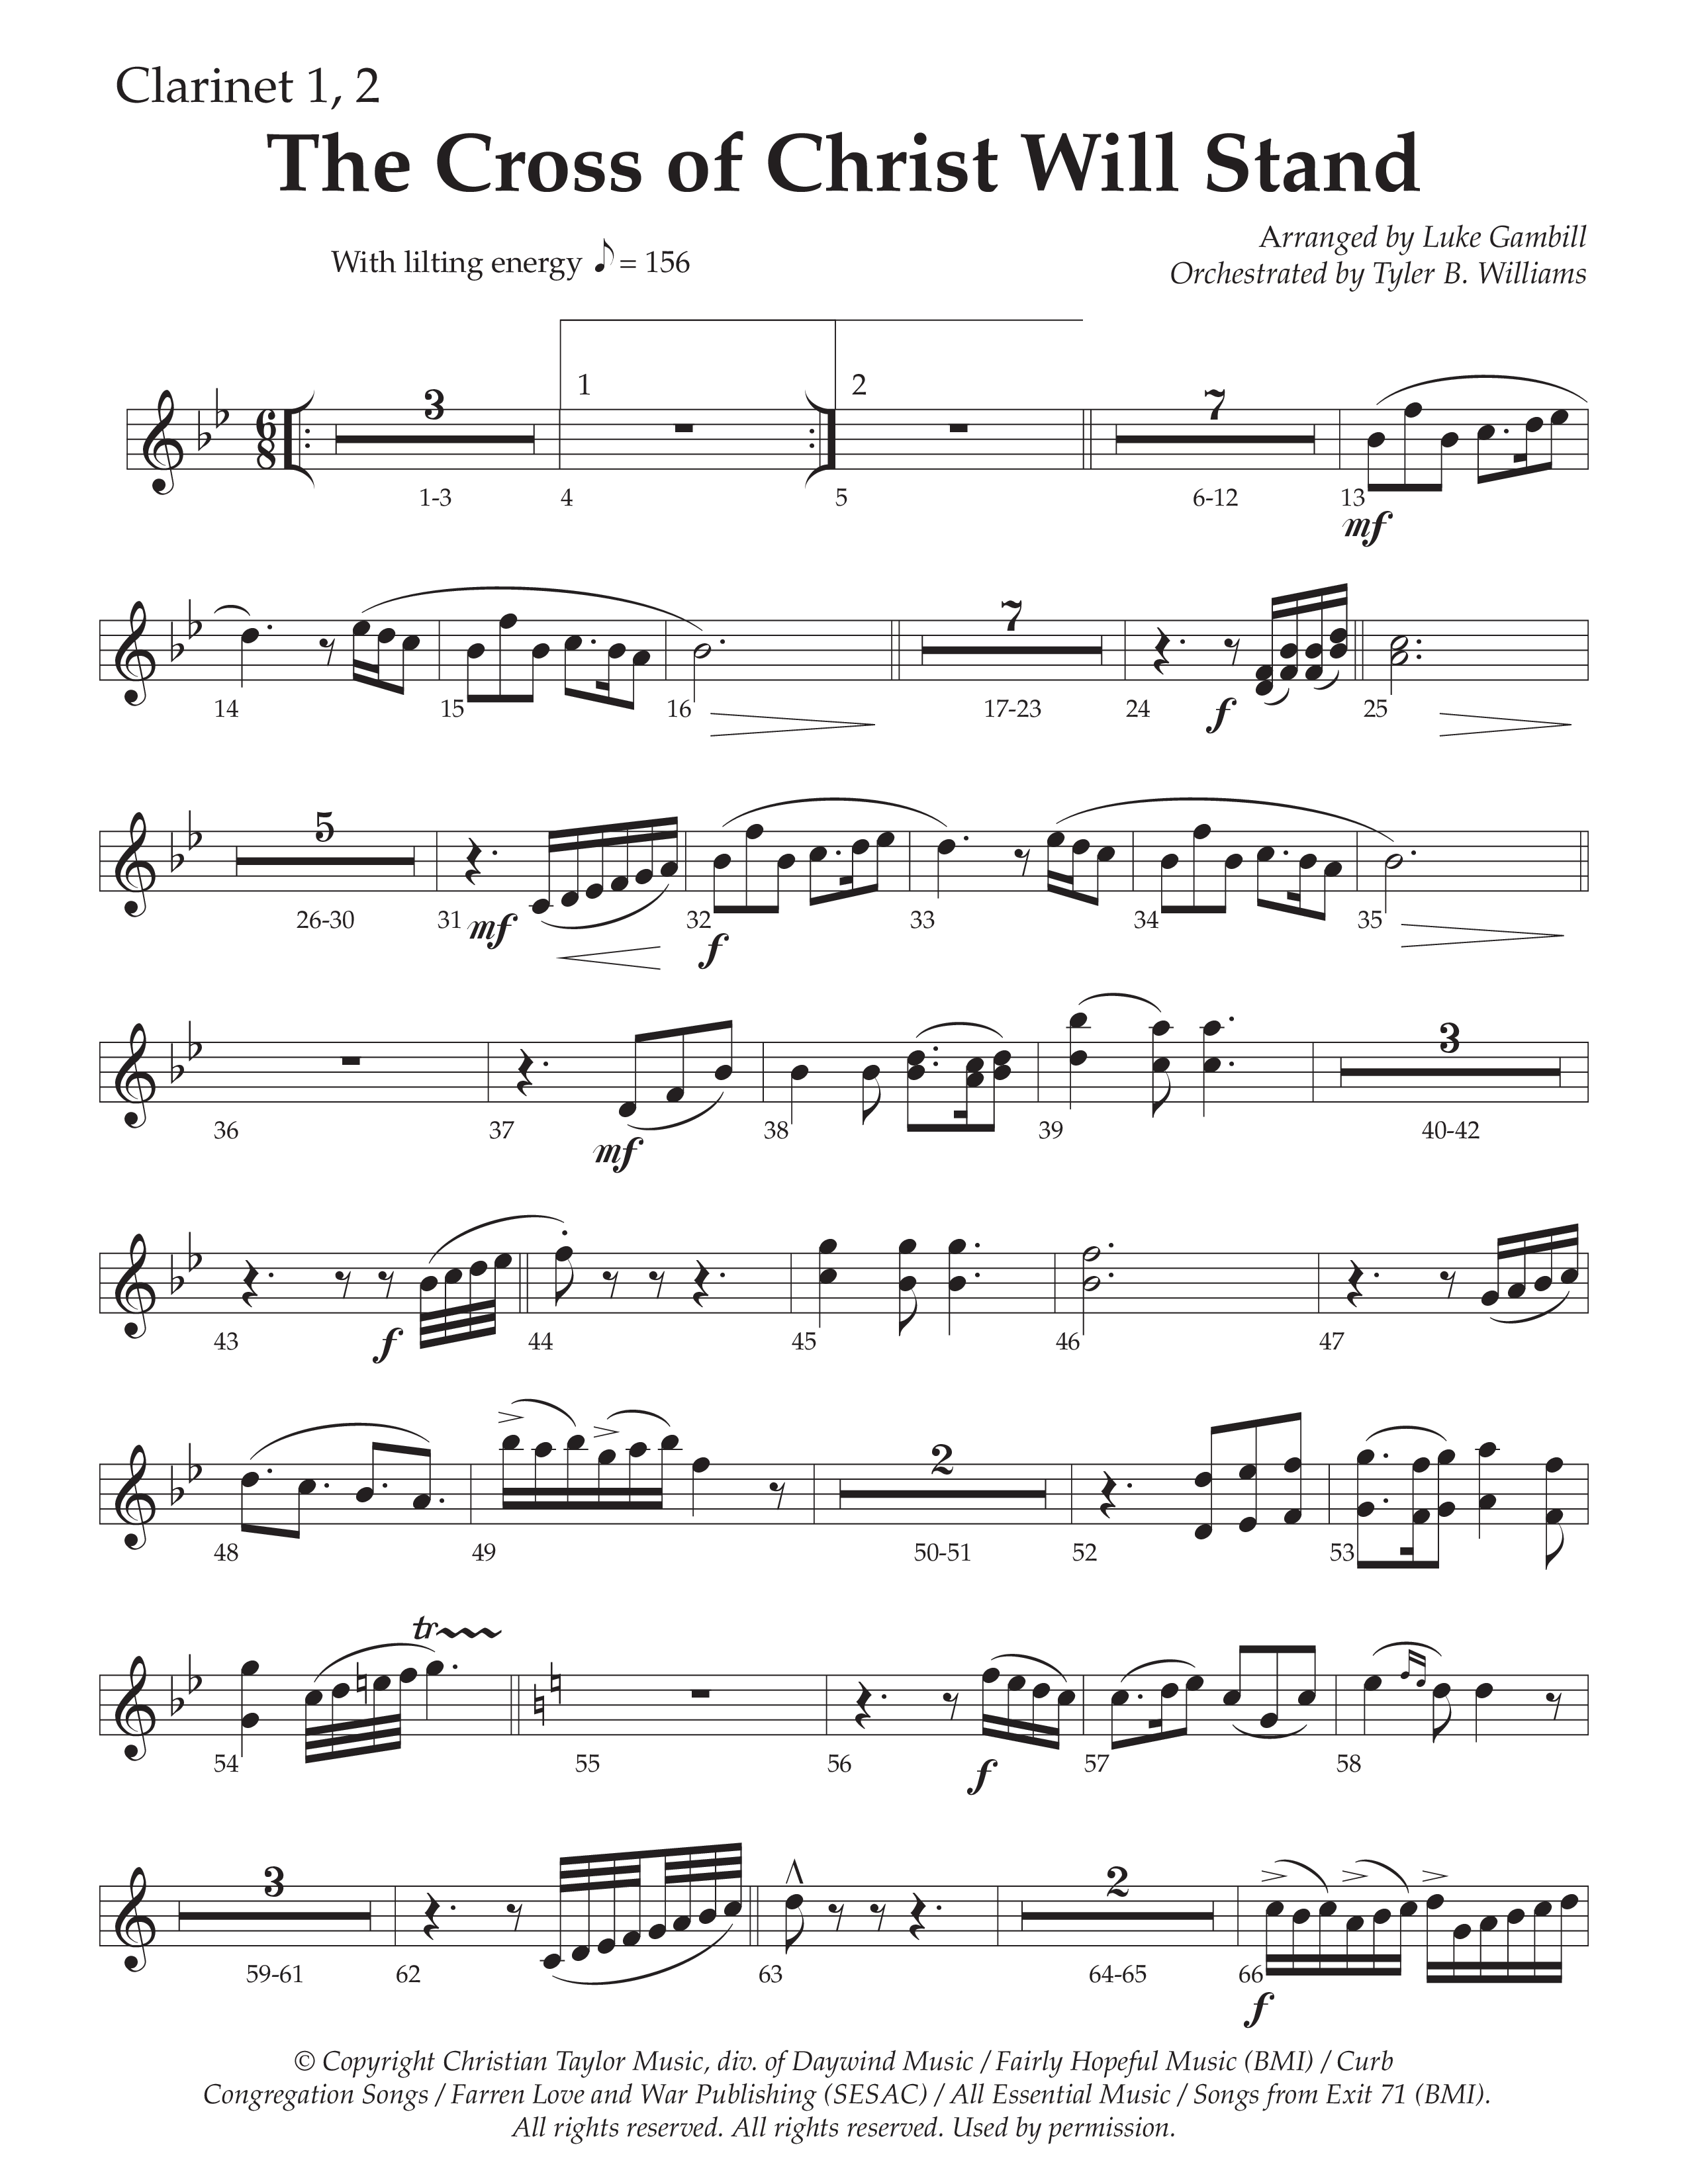 The Cross of Christ Will Stand (Choral Anthem SATB) Clarinet 1/2 (Daywind Worship / Arr. Luke Gambill)